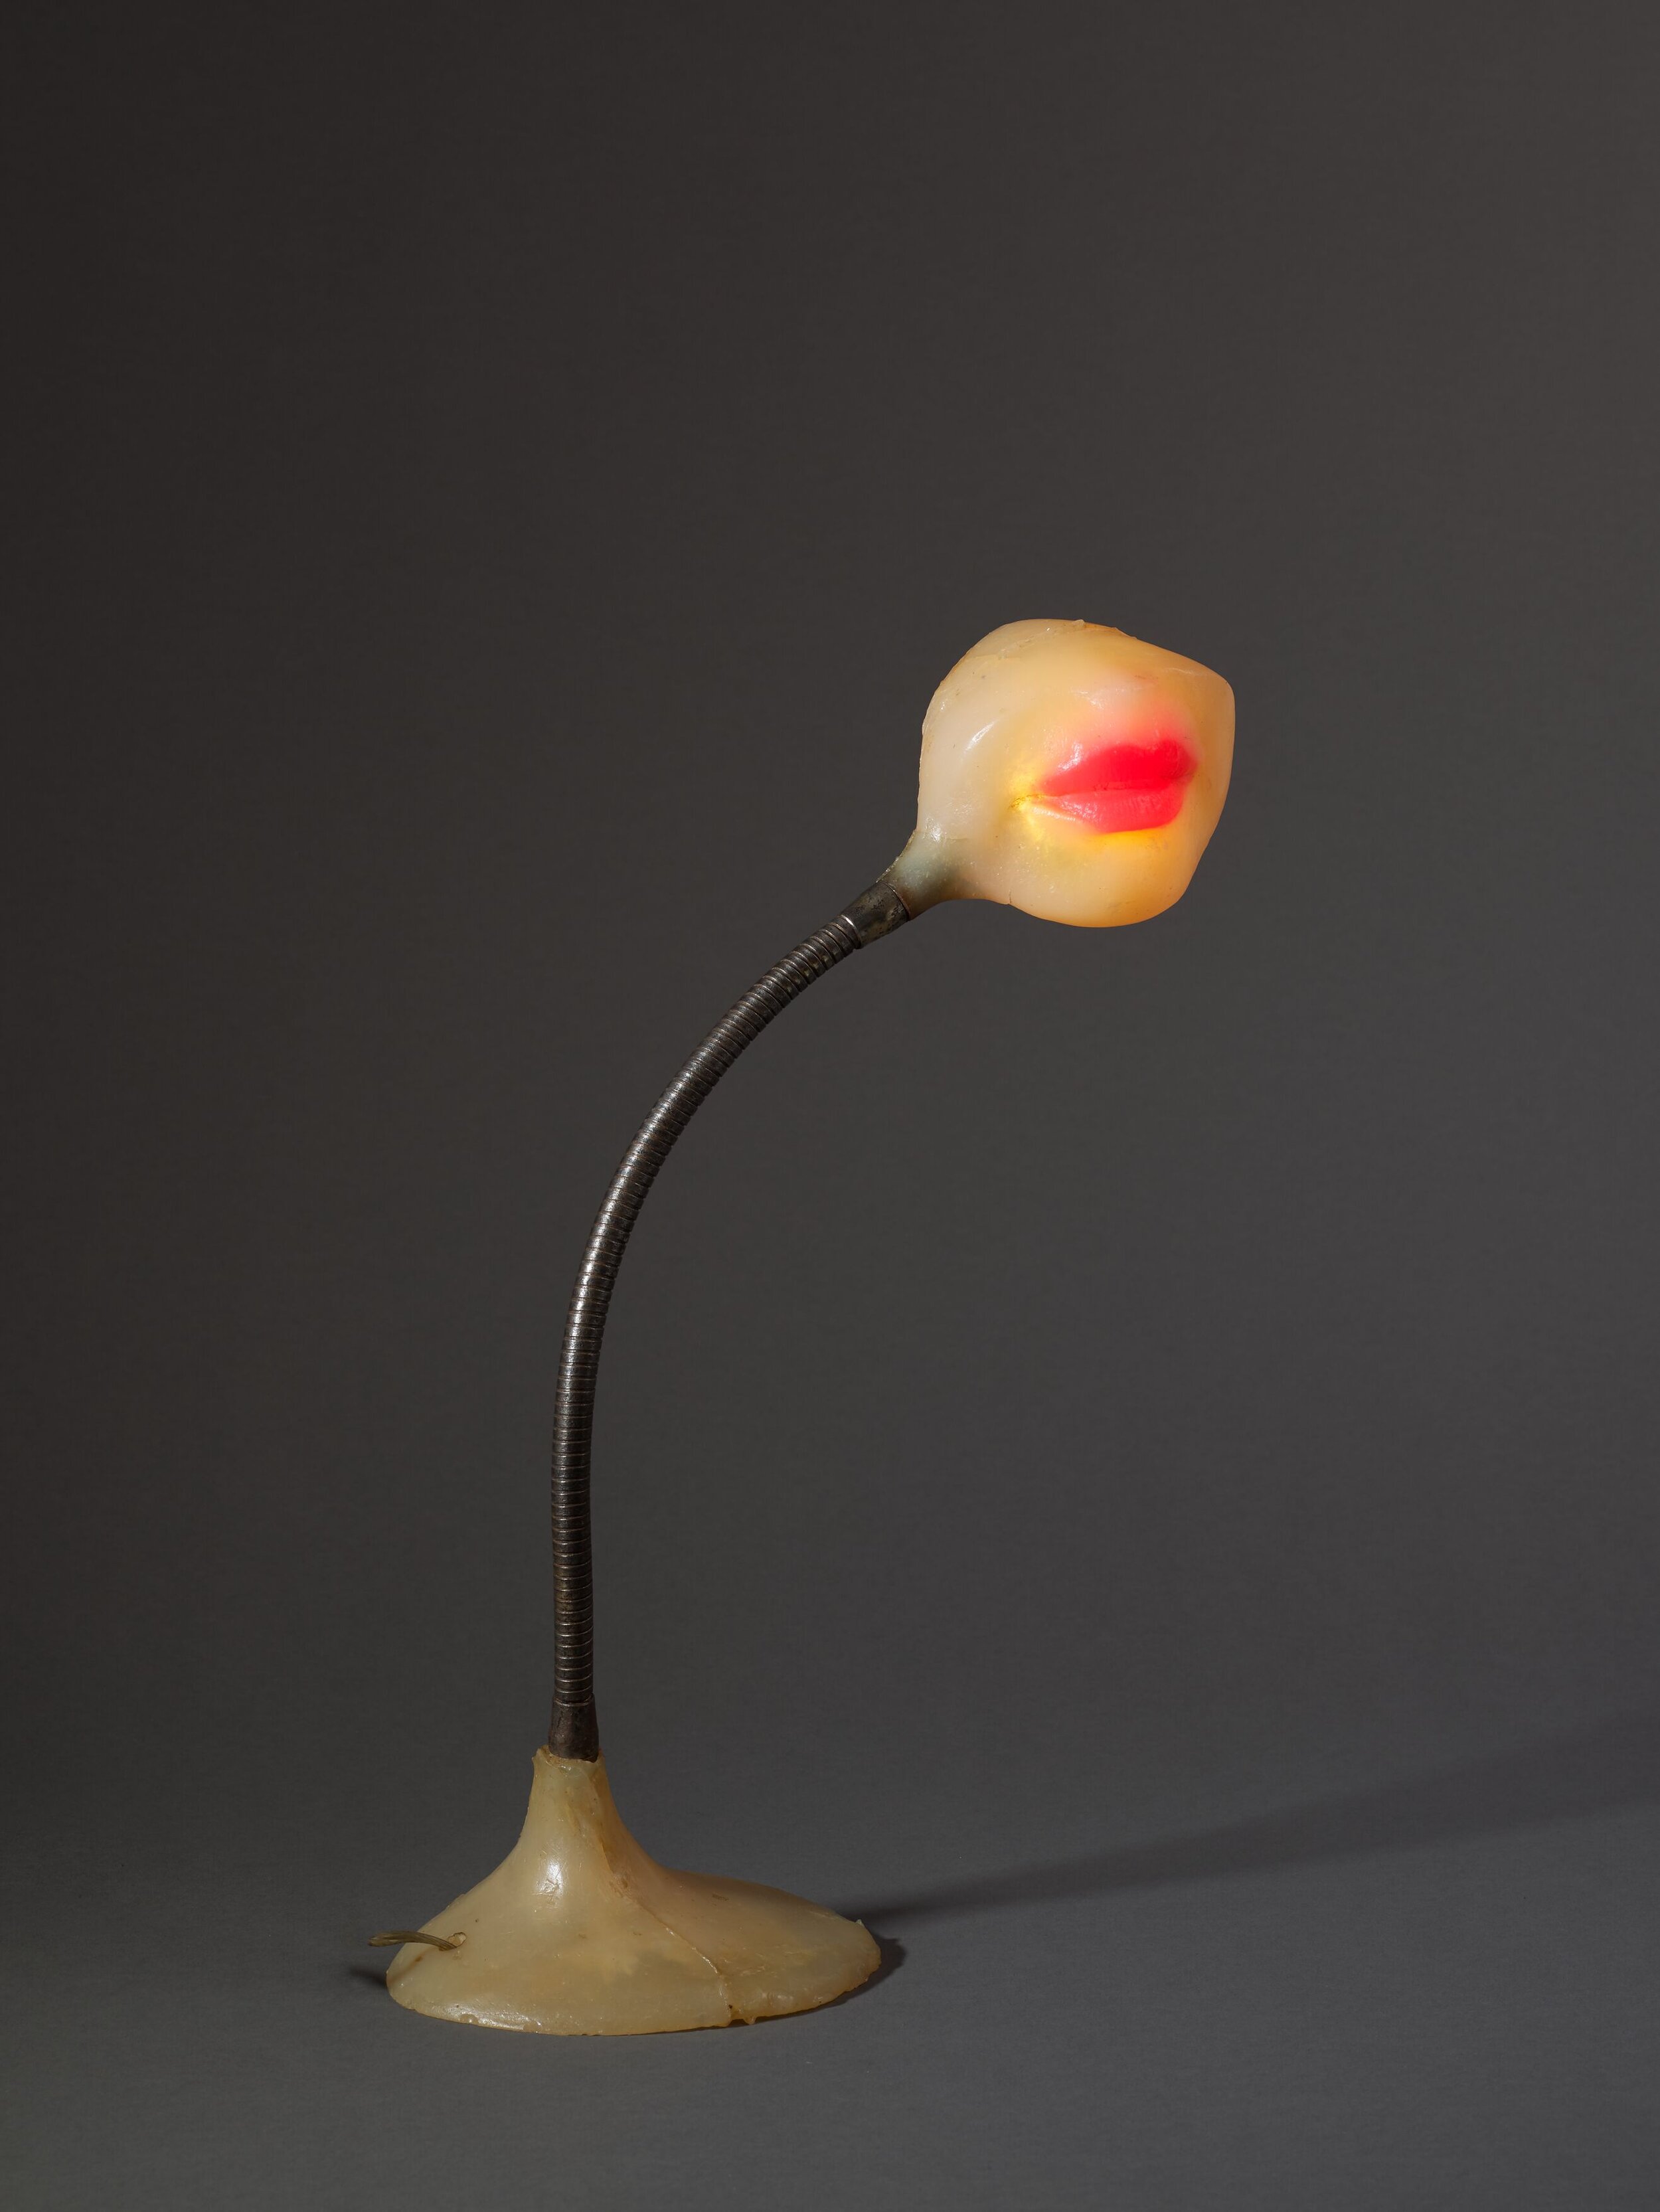  Lampe-bouche (Illuminated Lips) 1966 Coloured polyester resin, light bulb, electrical wiring and metal 43 x 15 x 11 cm / 16 7/8 x 5 7/8 x 4 3/8 in Photo: Thomas Barratt 